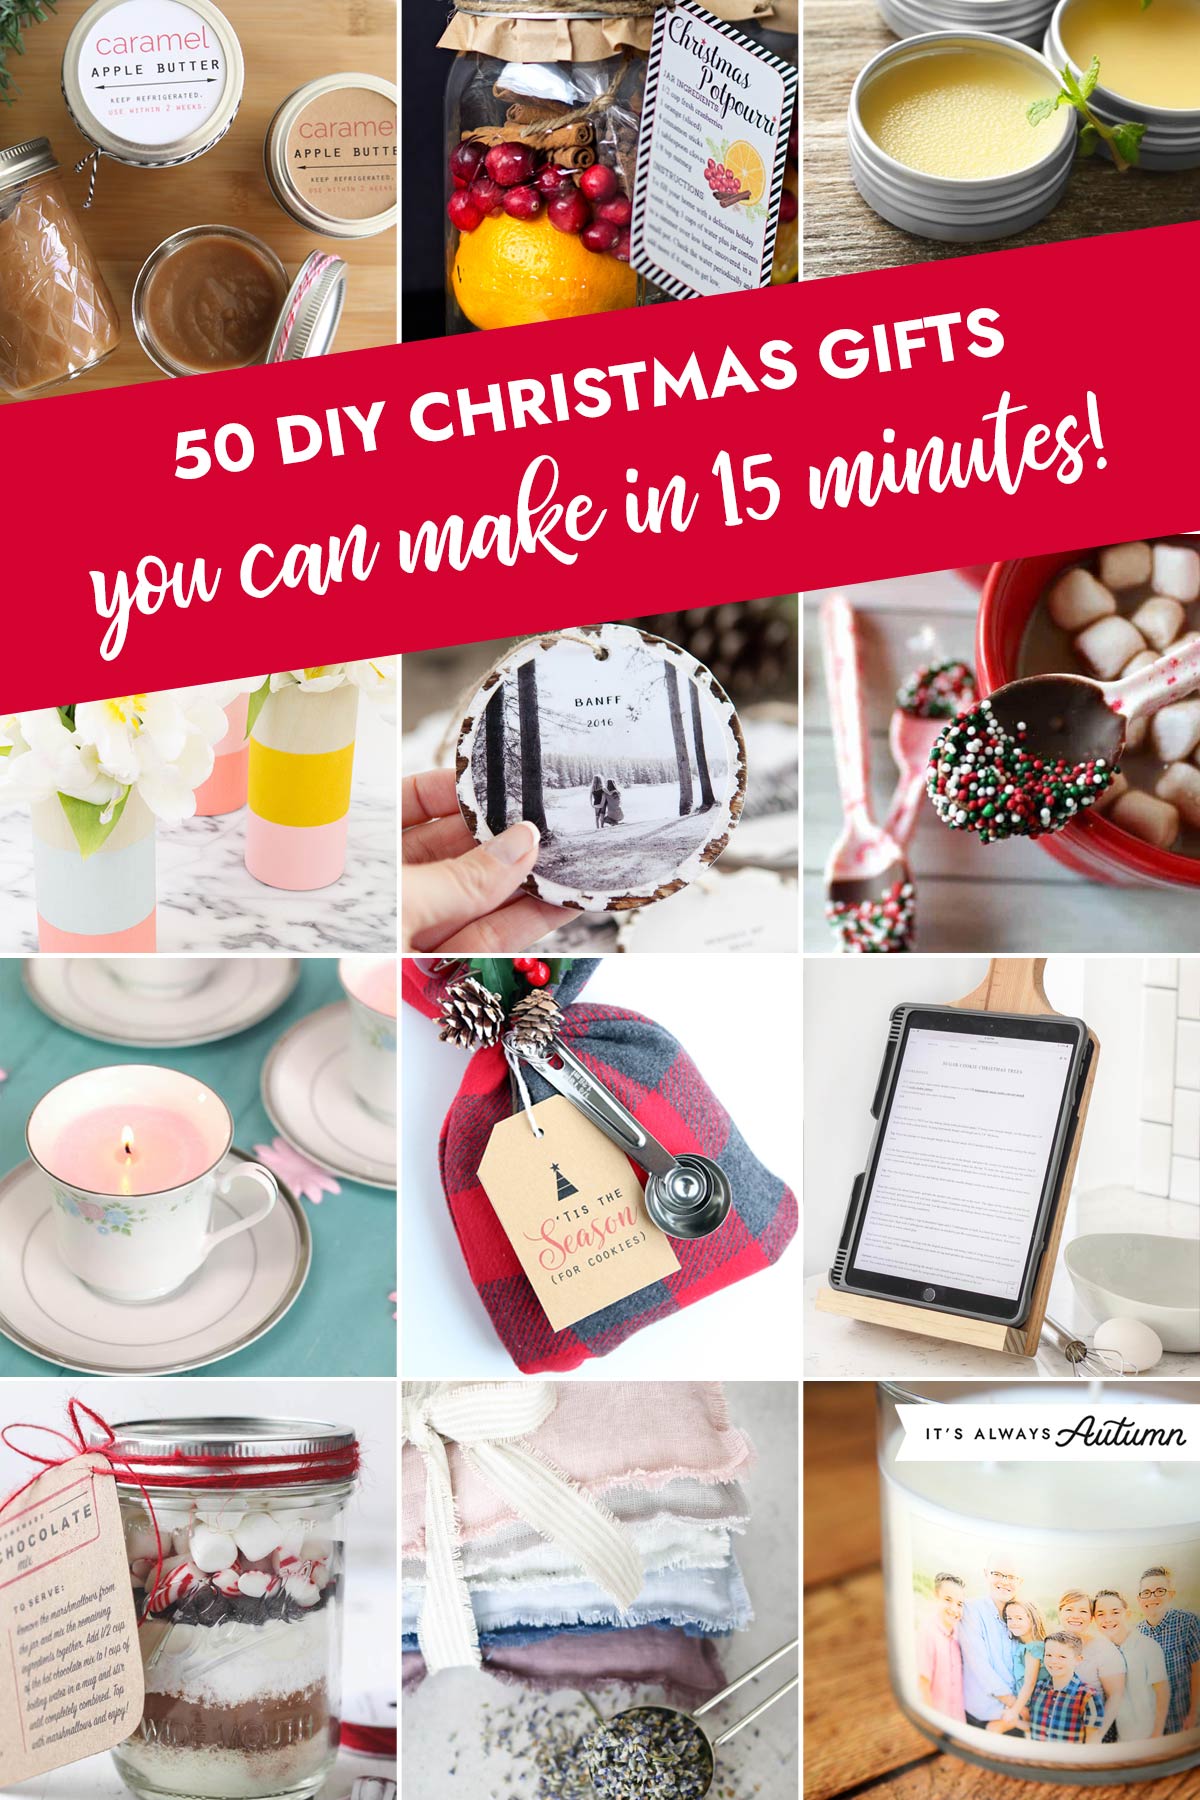 25 Last Minute Gifts to Sew